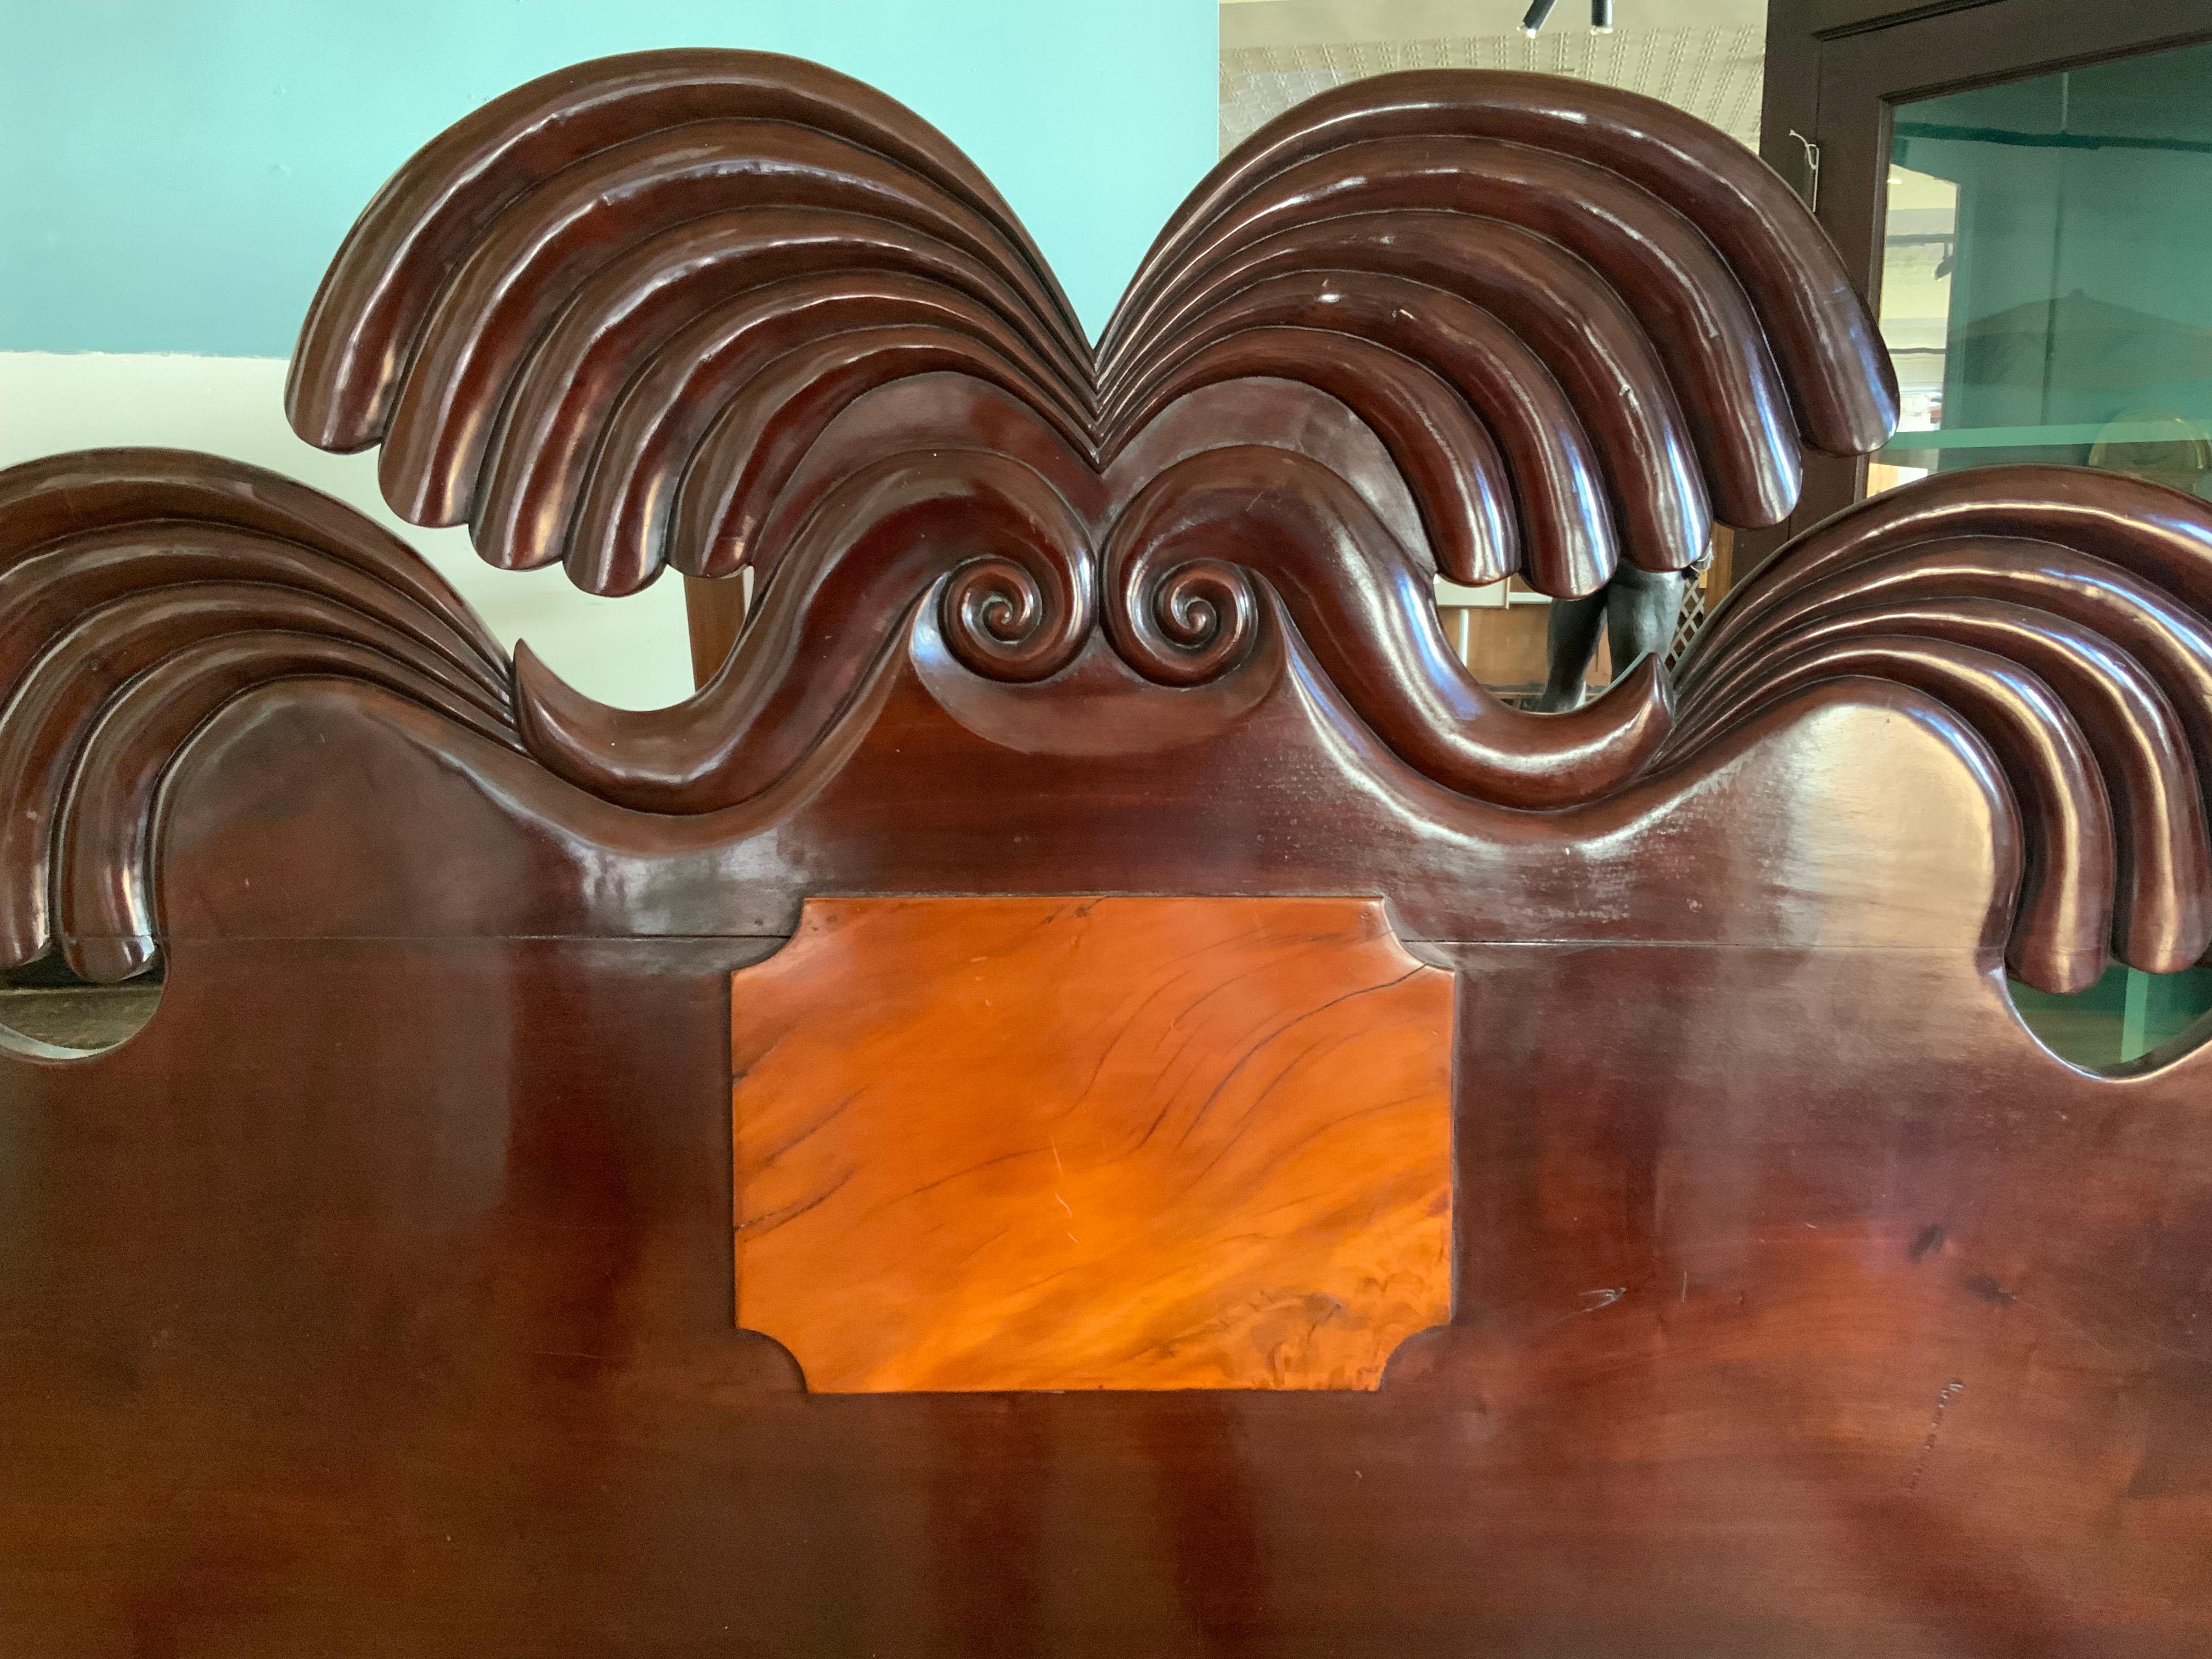 This elegant Caribbean mahogany bed was hand carved in the 19th century in Jamaica. This Rare West Indies Bedstead exhibits a scarce and desirable hand carved iconic Jamaican Double Waterfall headboard which resonates with the four solid mahogany